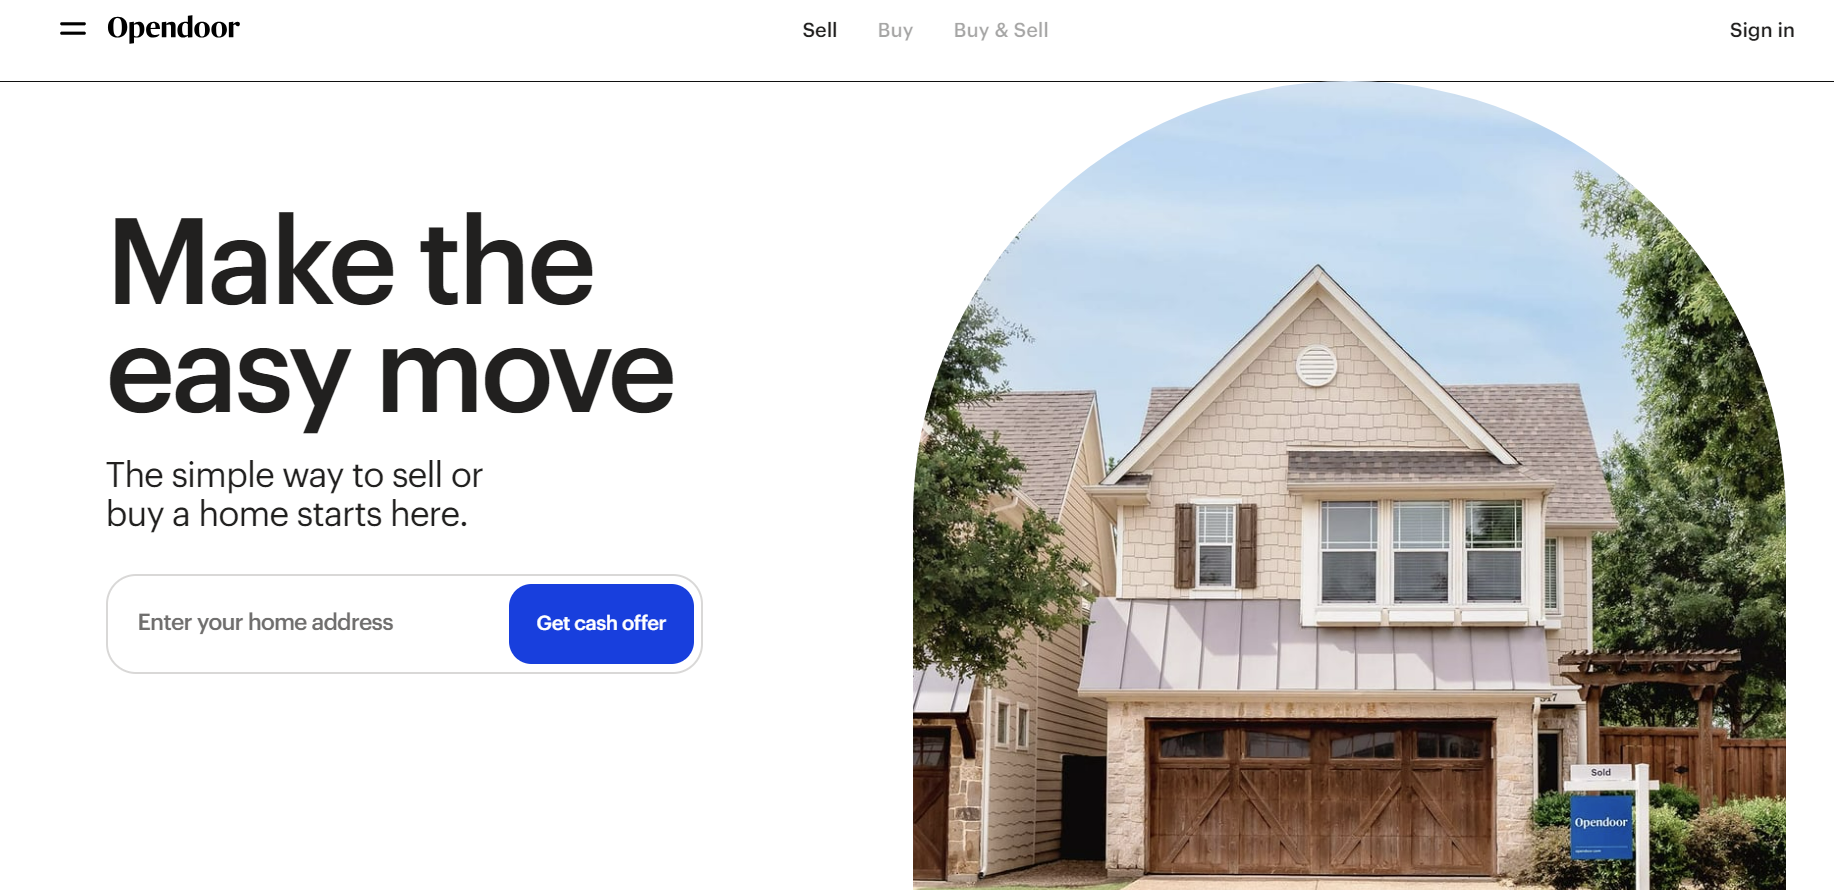 Opendoor is a tech-based real estate company that simplifies the process of buying and selling homes. 